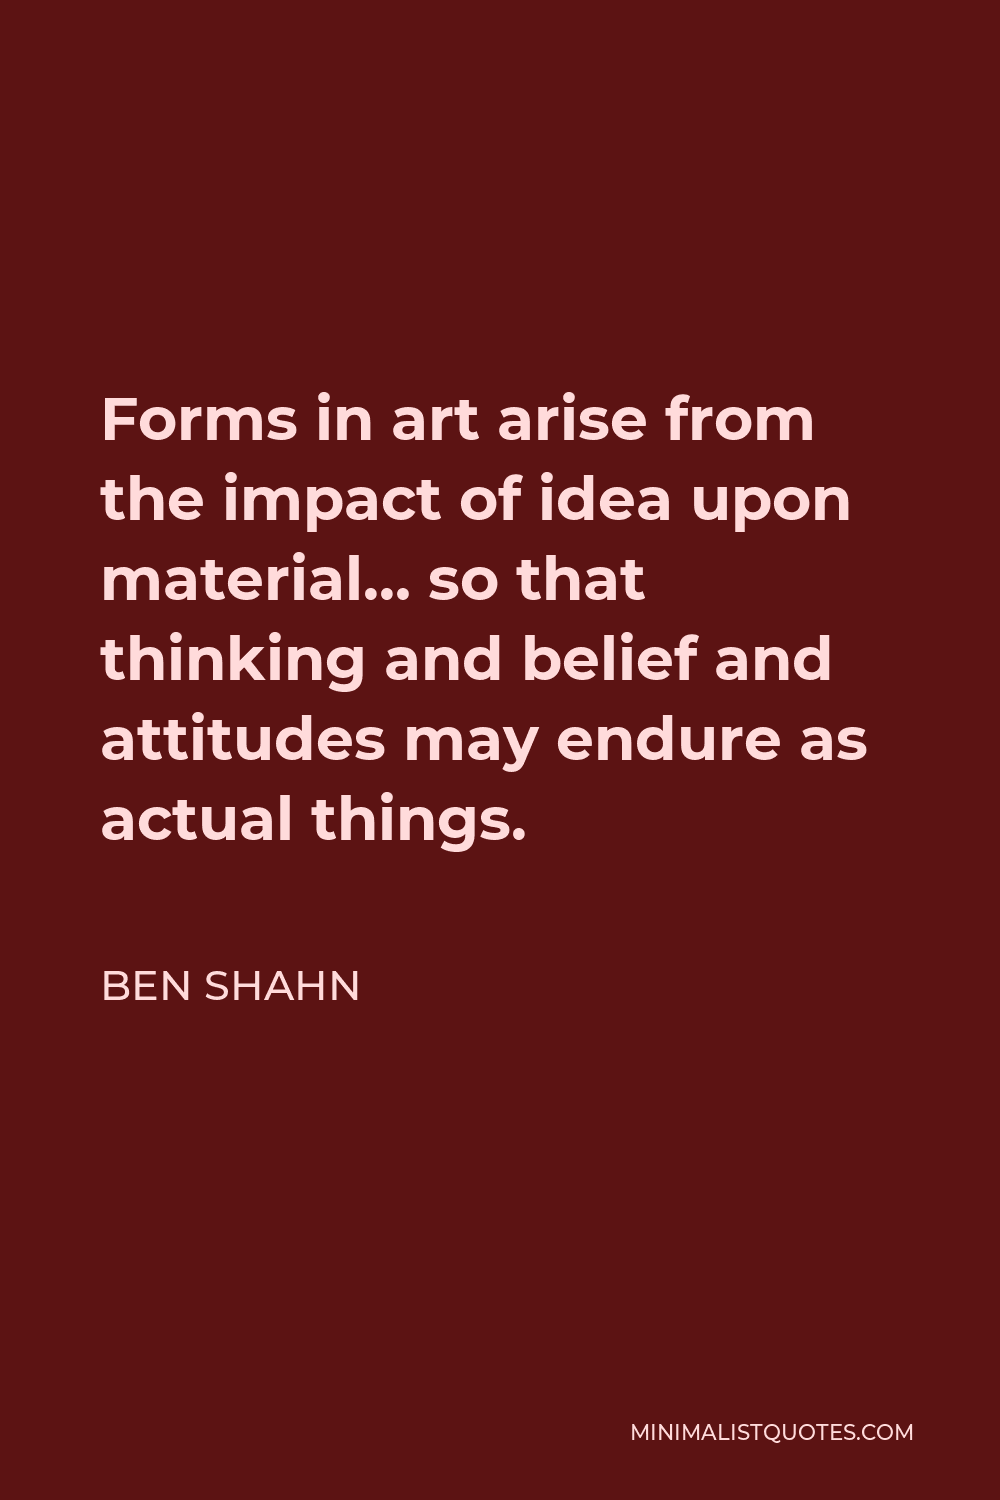 Ben Shahn Quote - Forms in art arise from the impact of idea upon material… so that thinking and belief and attitudes may endure as actual things.